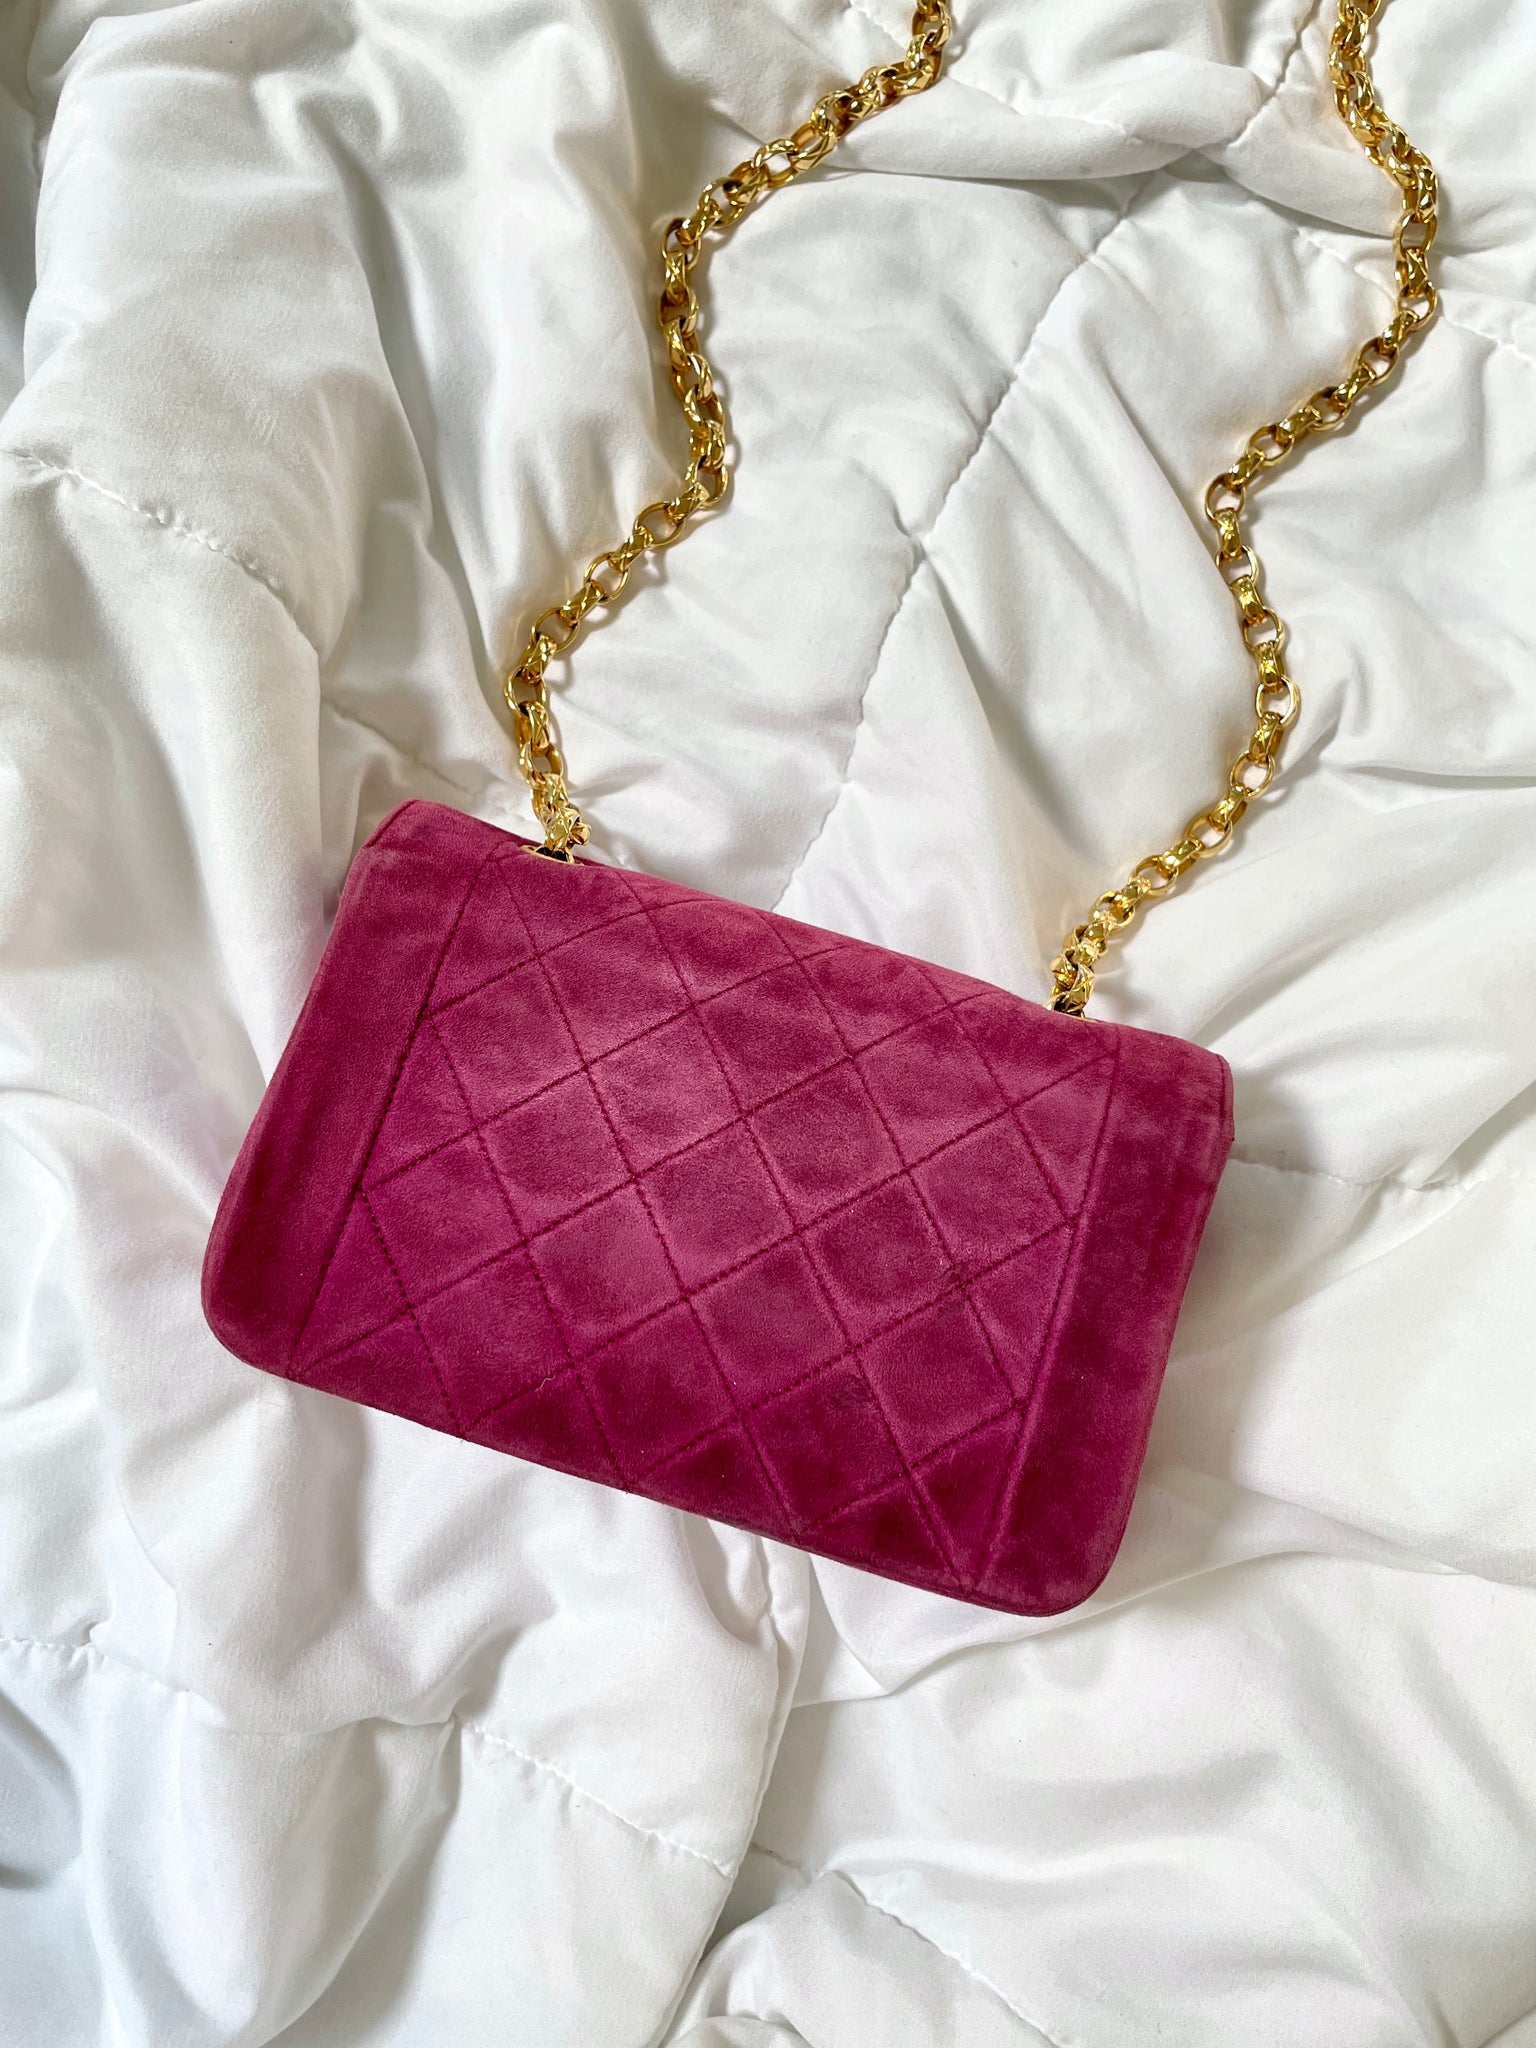 Extremely Rare Chanel Suede Mini Diana Bag – SFN